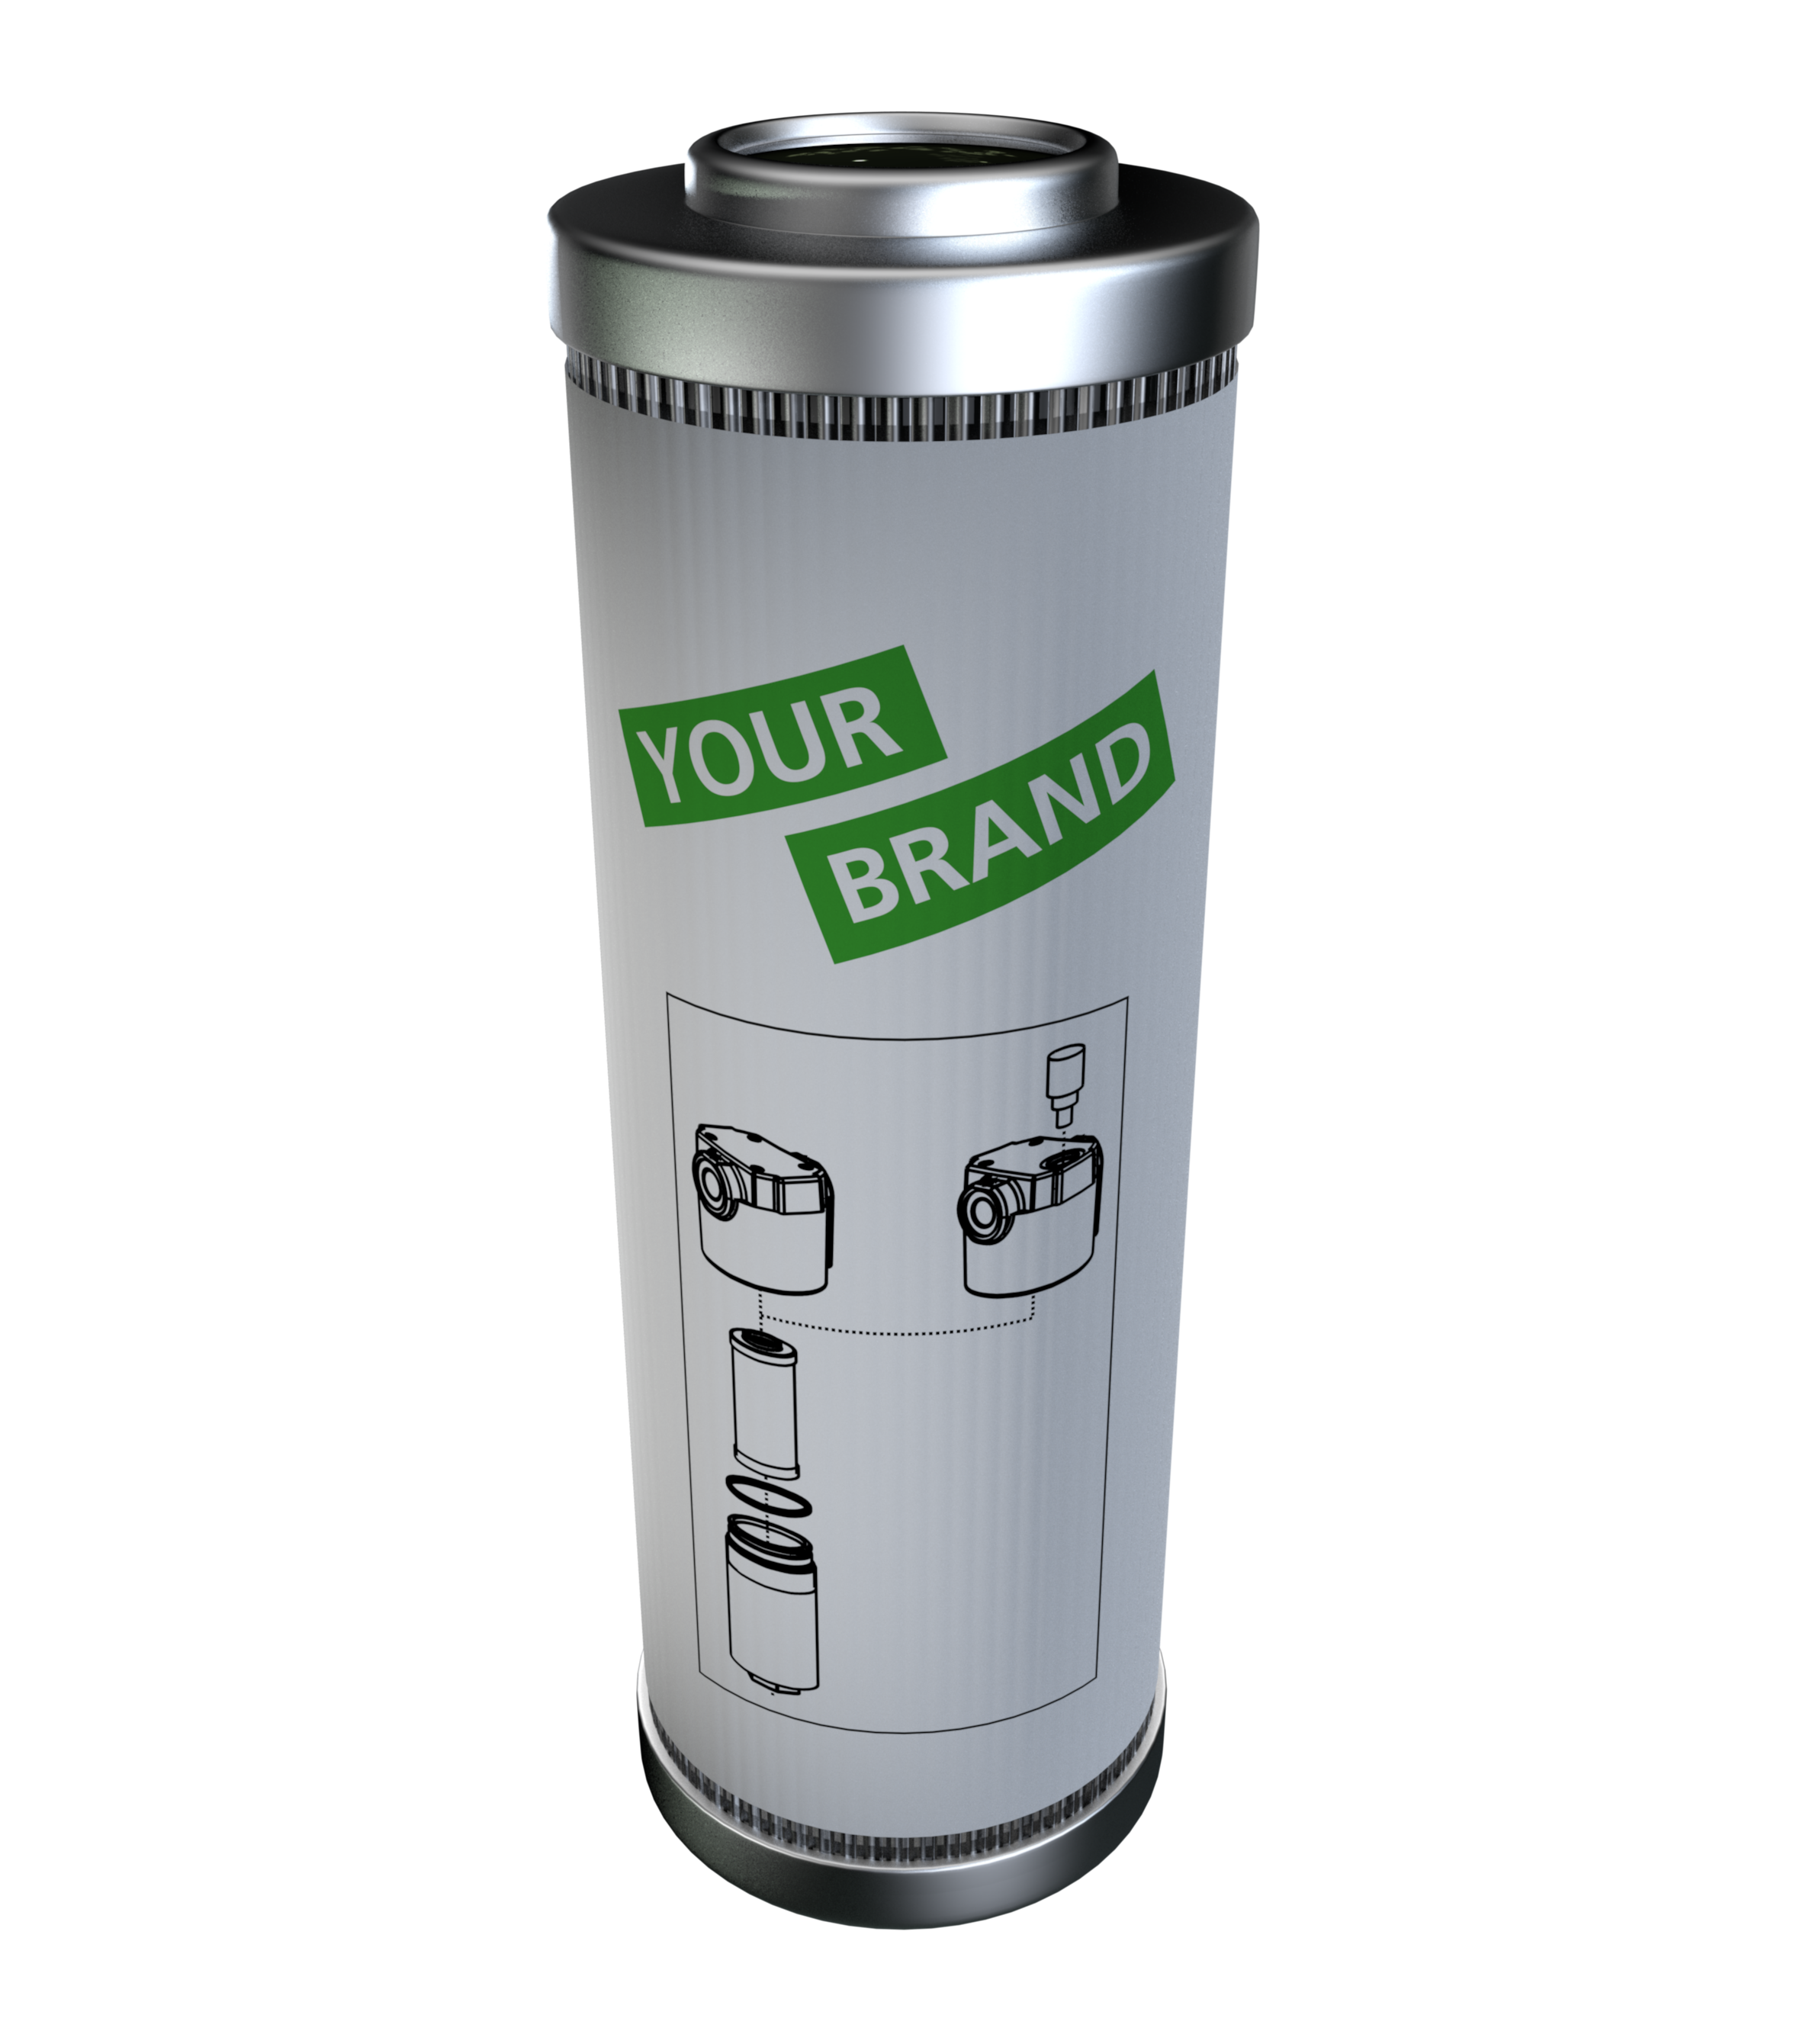 YourBrand_02